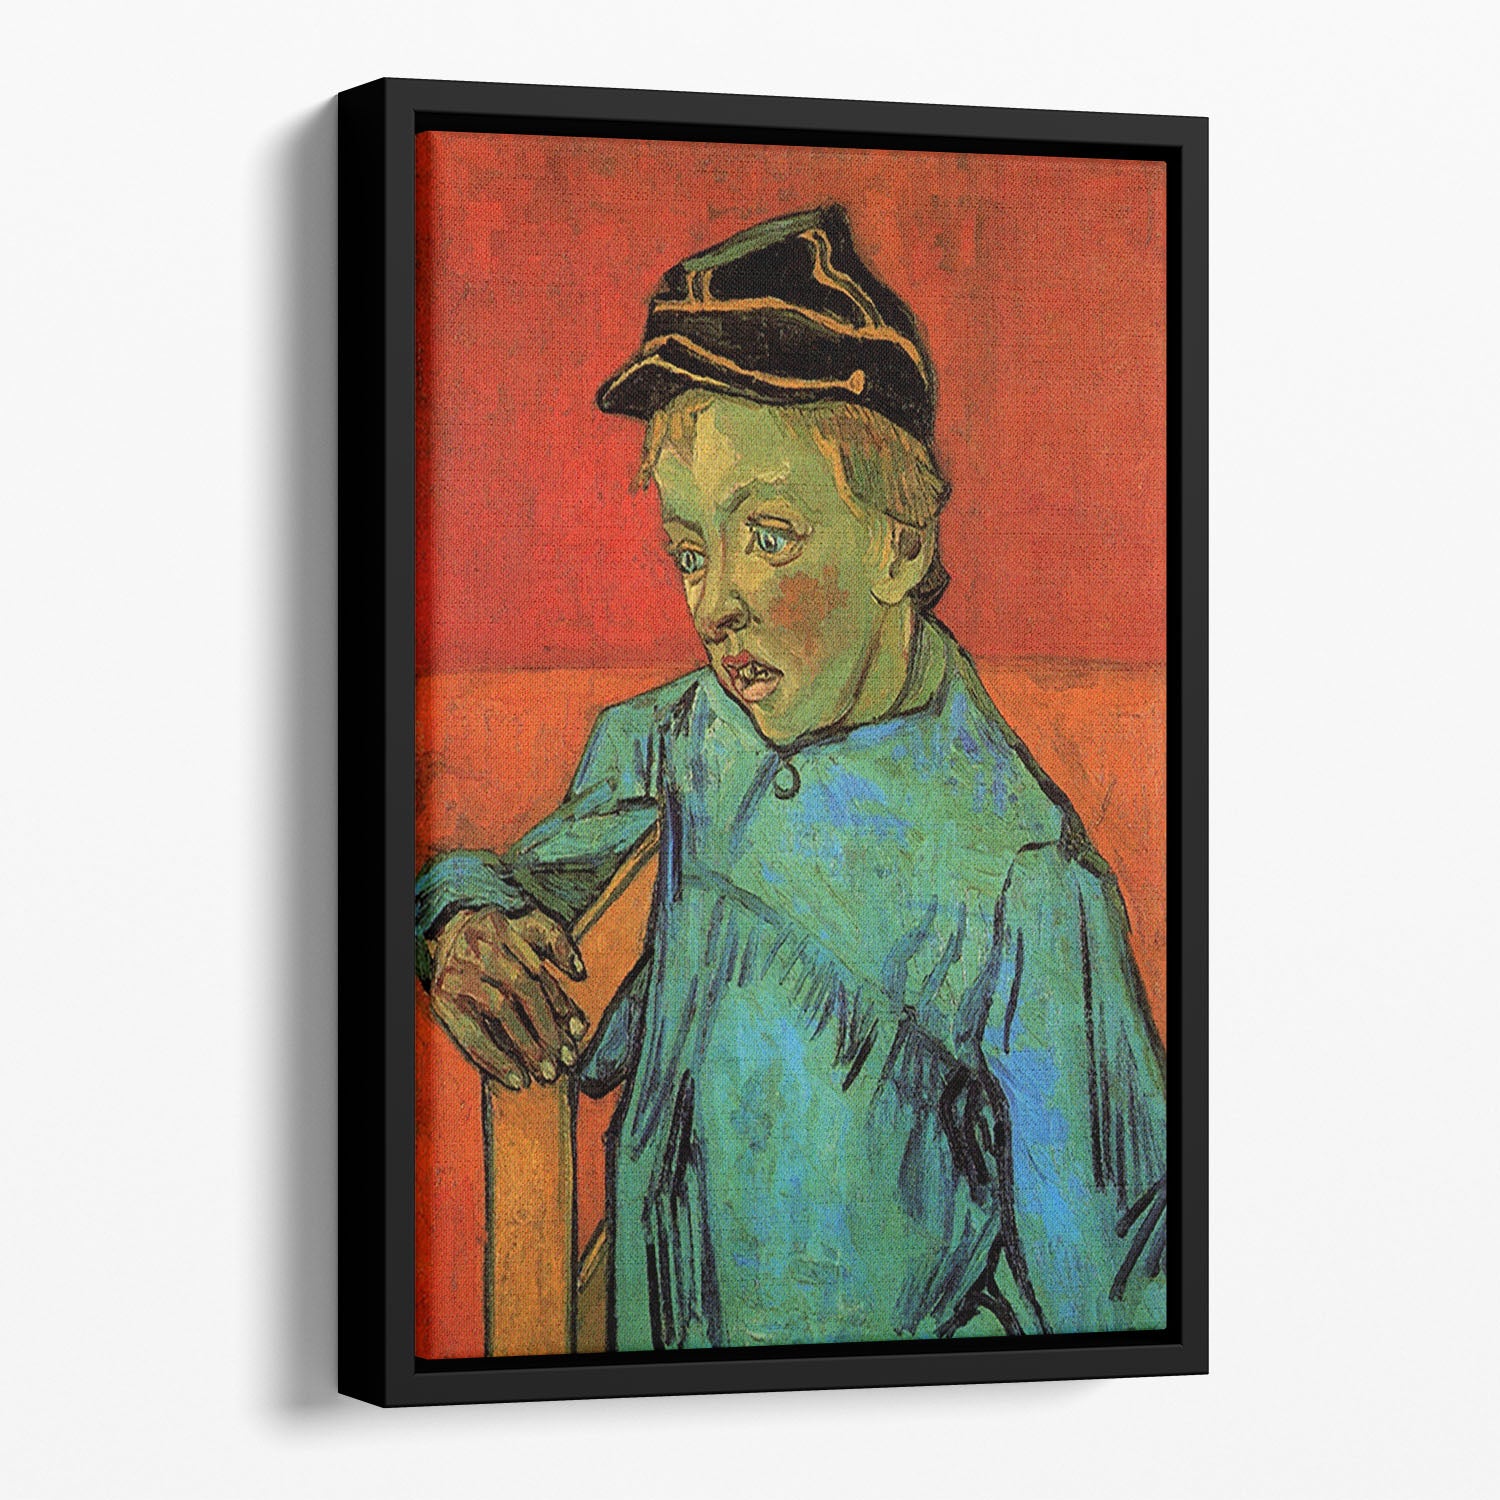 The Schoolboy Camille Roulin by Van Gogh Floating Framed Canvas